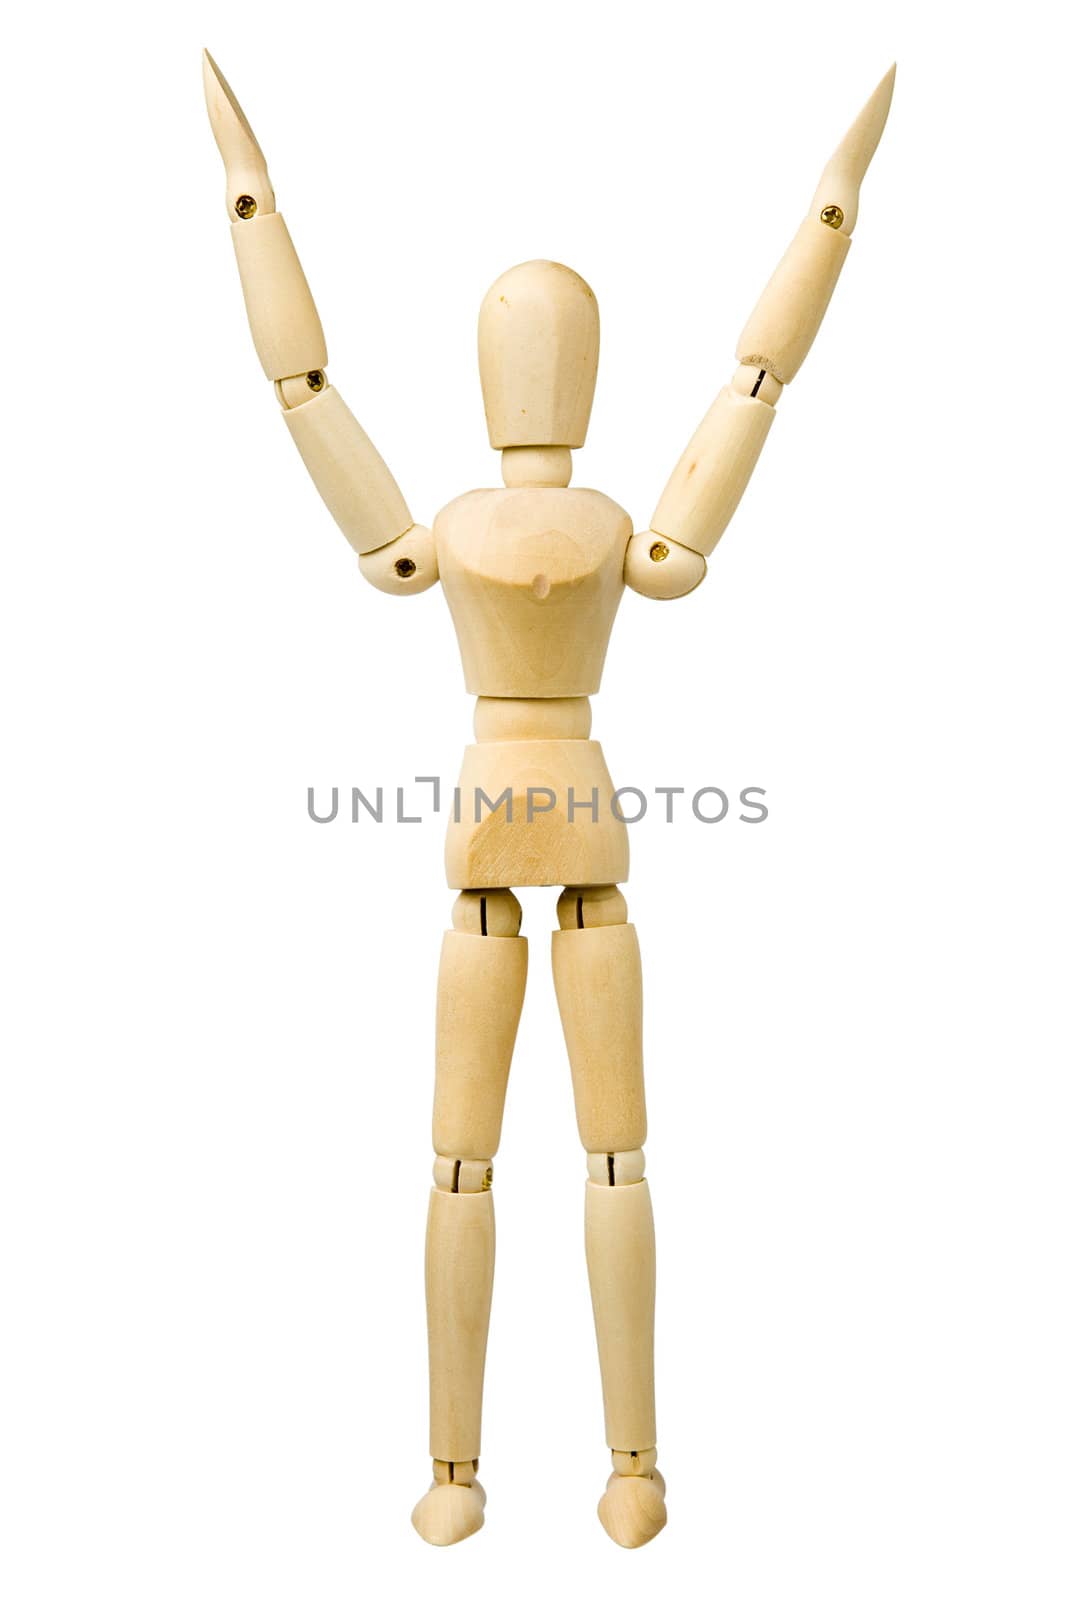 Wooden model dummy hands up. Isolated on a white background.